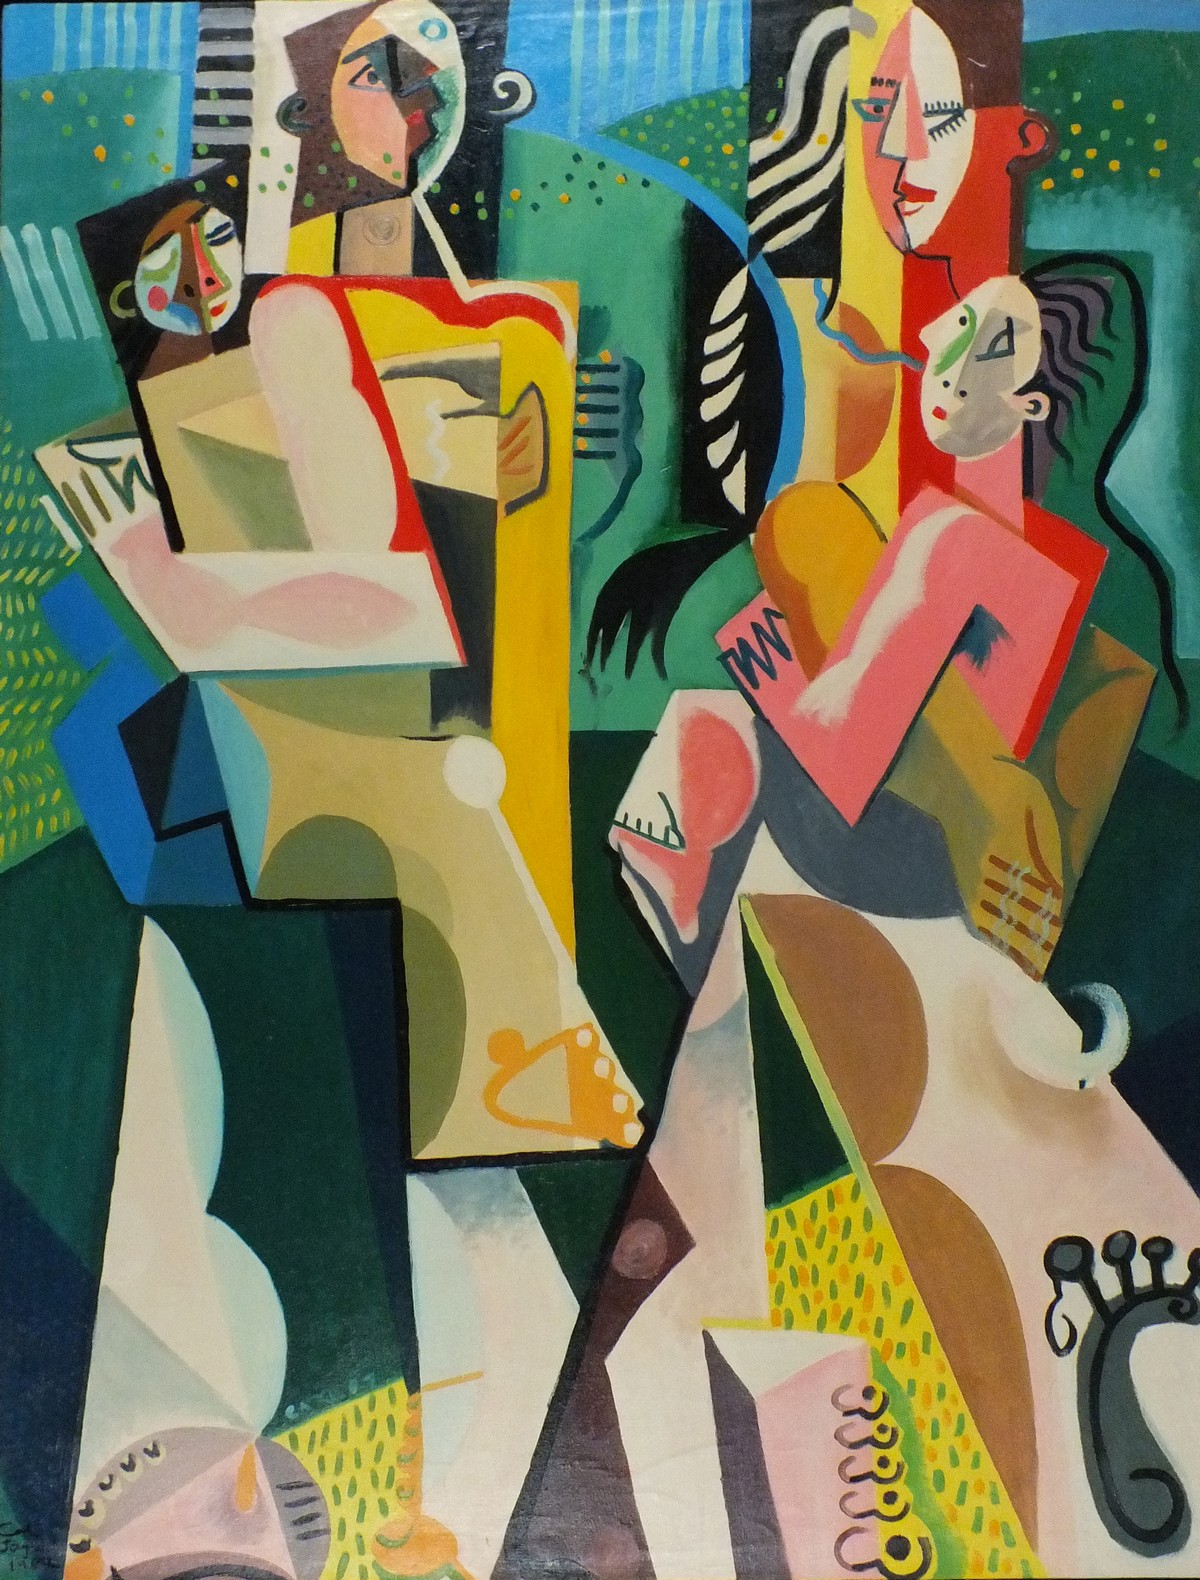 Carl JAYCOCK (British b. 1963) Family of Cubist Figures, Oil on canvas, Signed and dated 1987